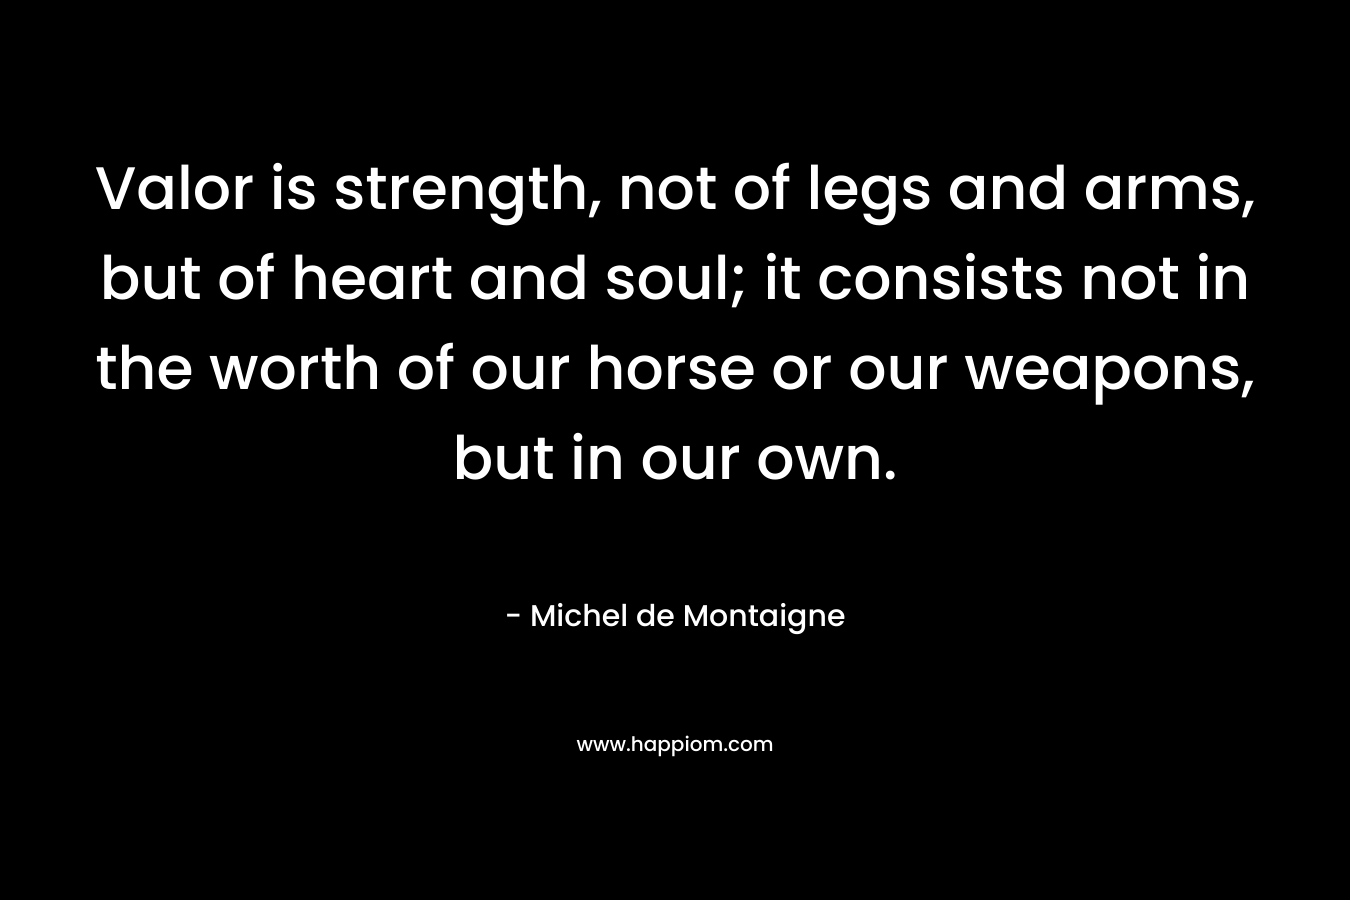 Valor is strength, not of legs and arms, but of heart and soul; it consists not in the worth of our horse or our weapons, but in our own. – Michel de Montaigne